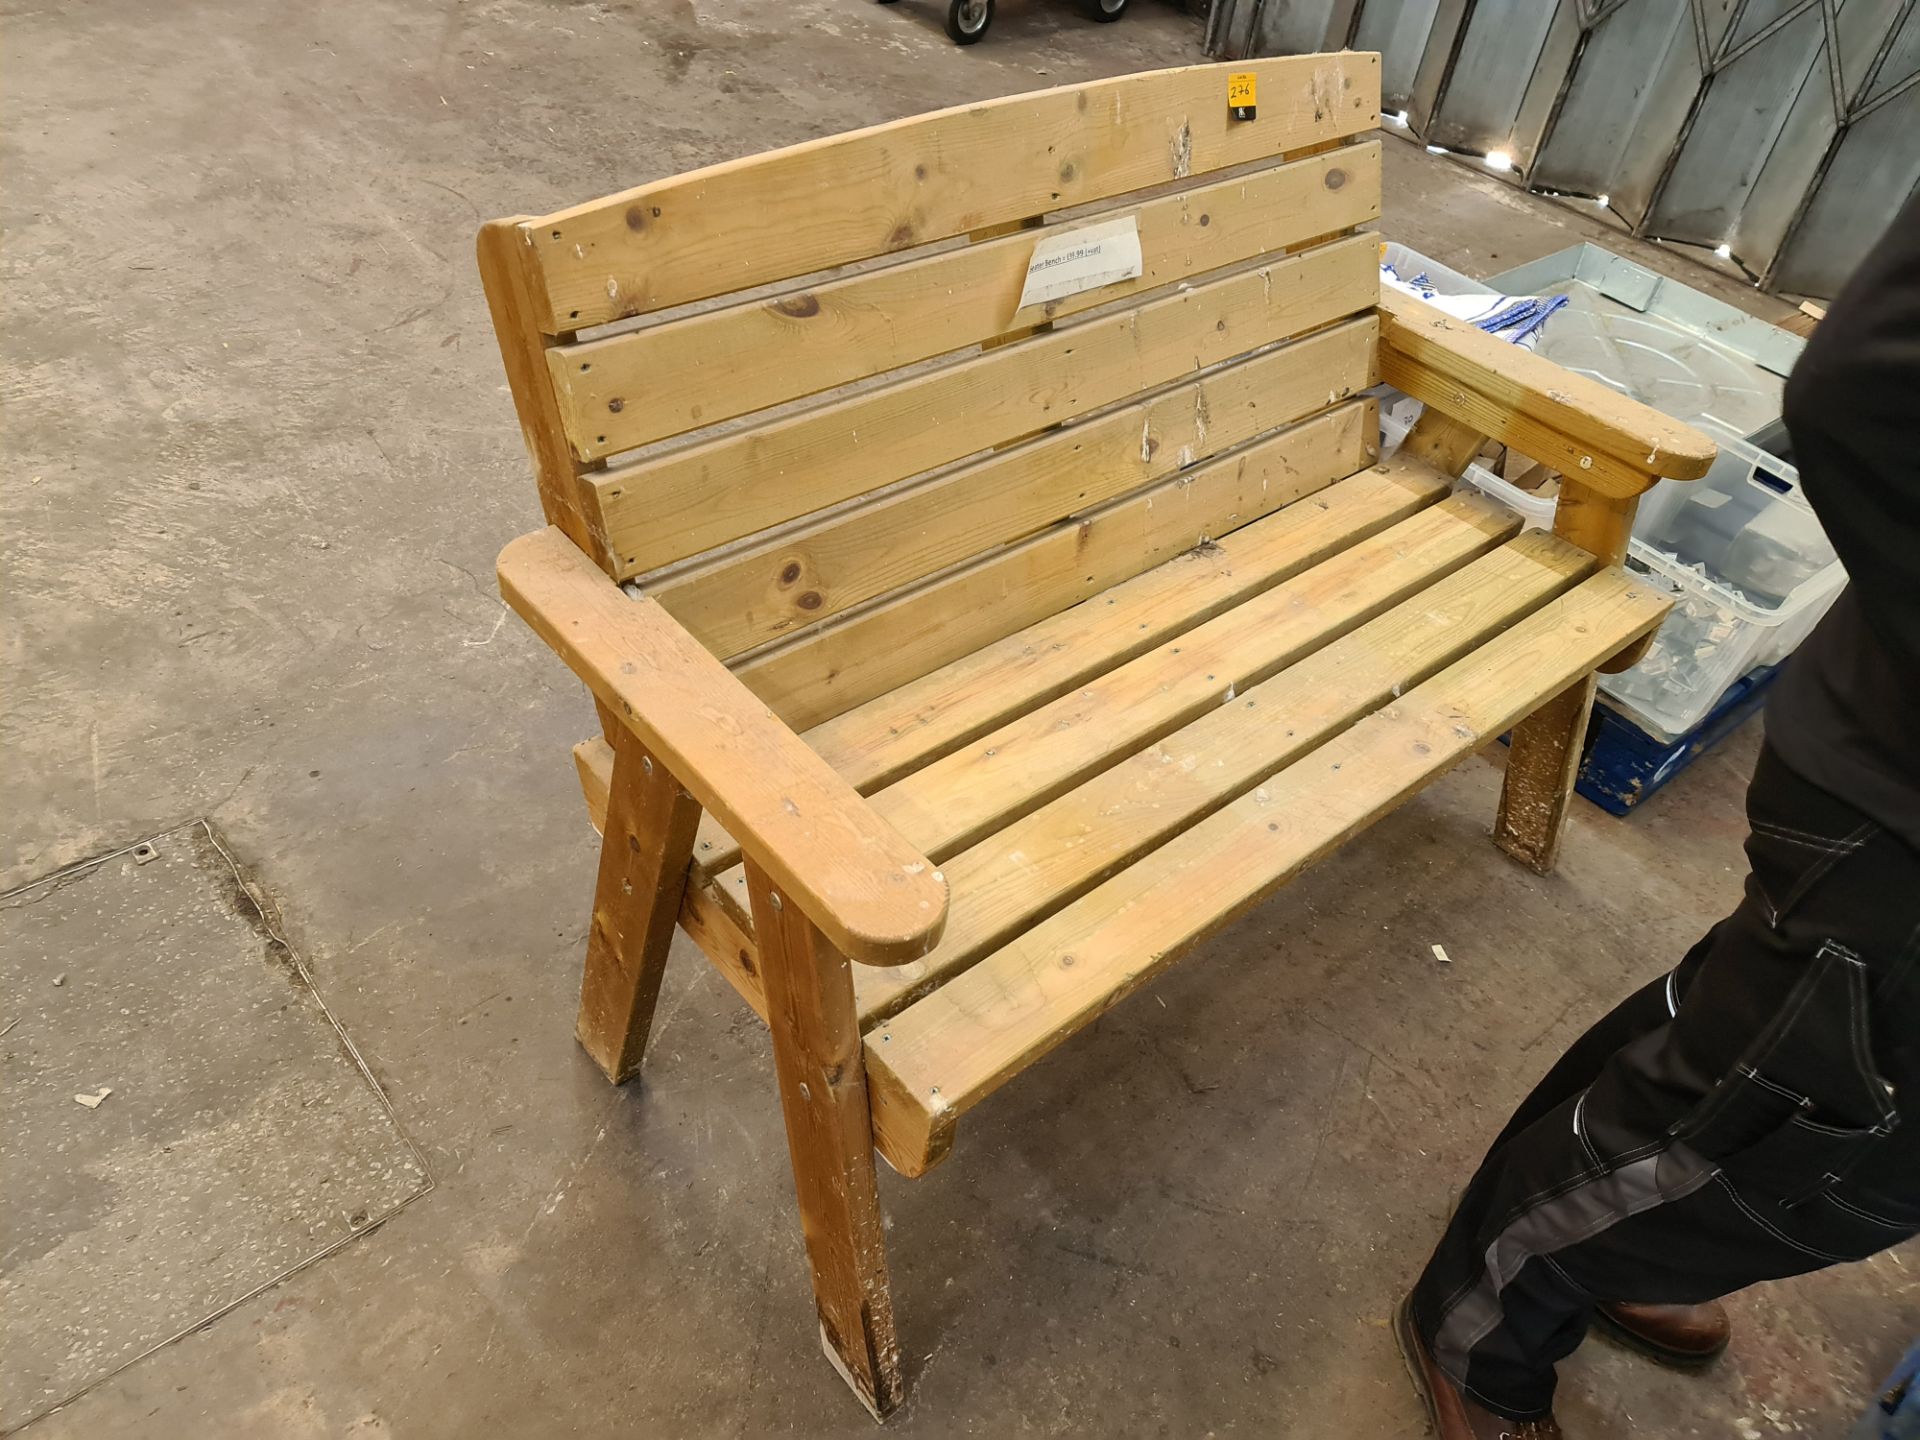 Wooden two seater bench